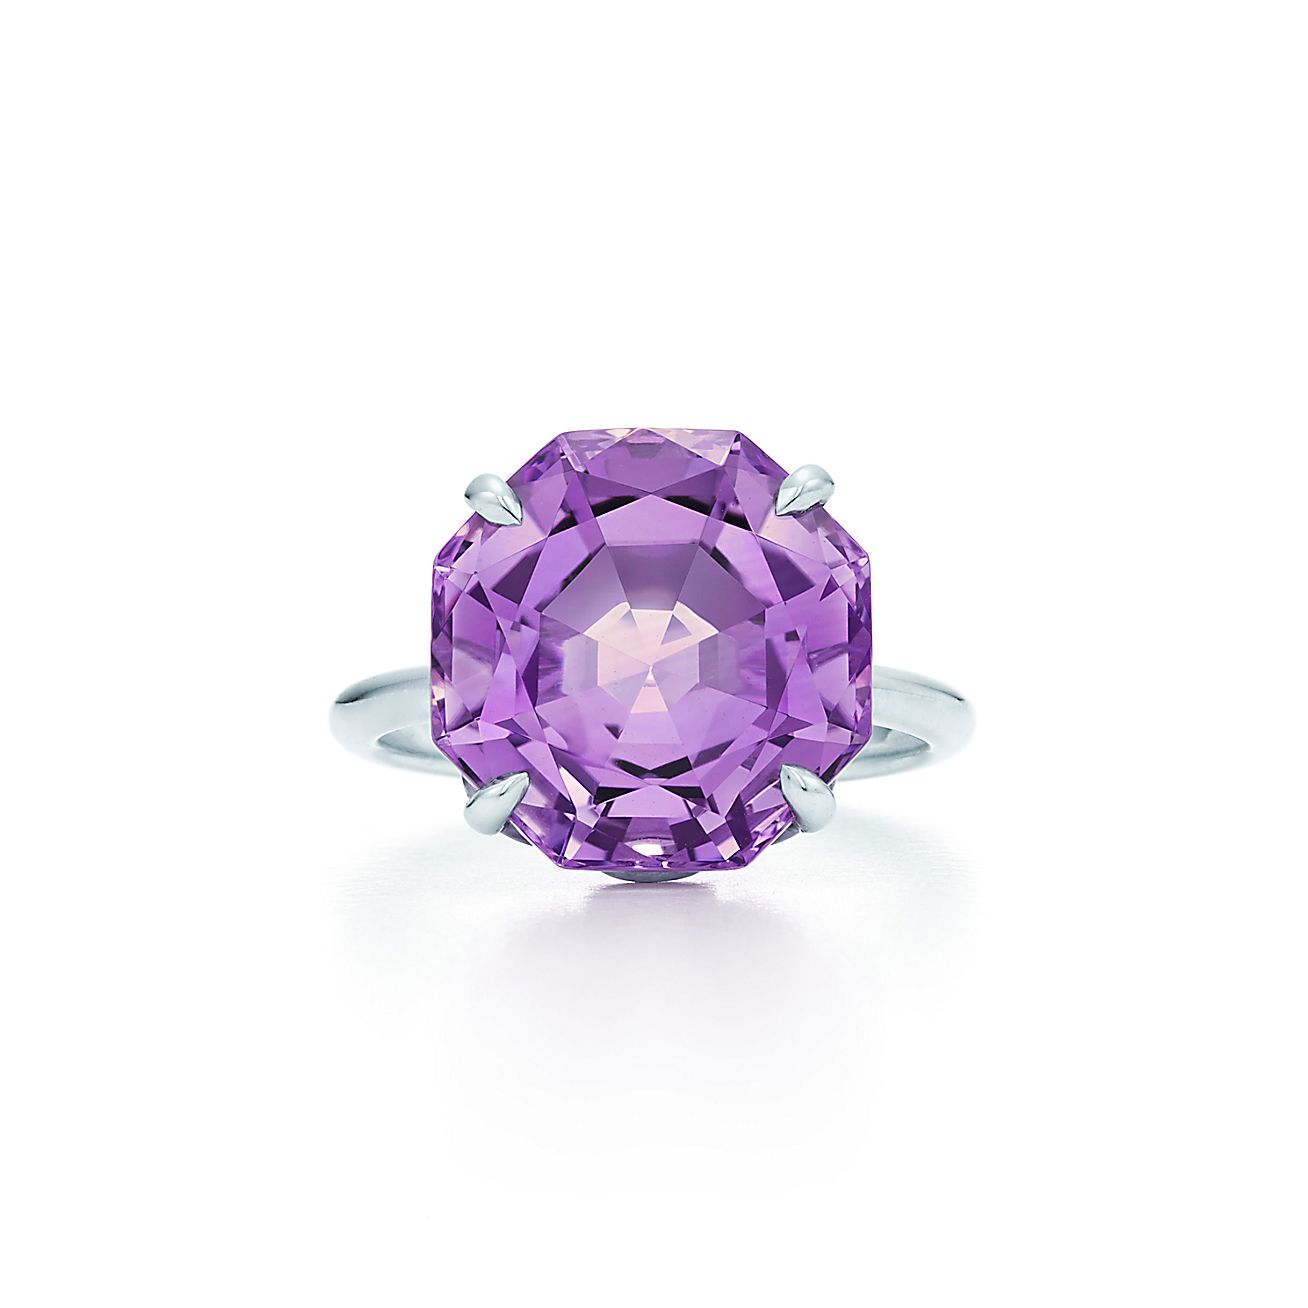 Tiffany Sparklers ring in sterling silver with a lavender amethyst ...